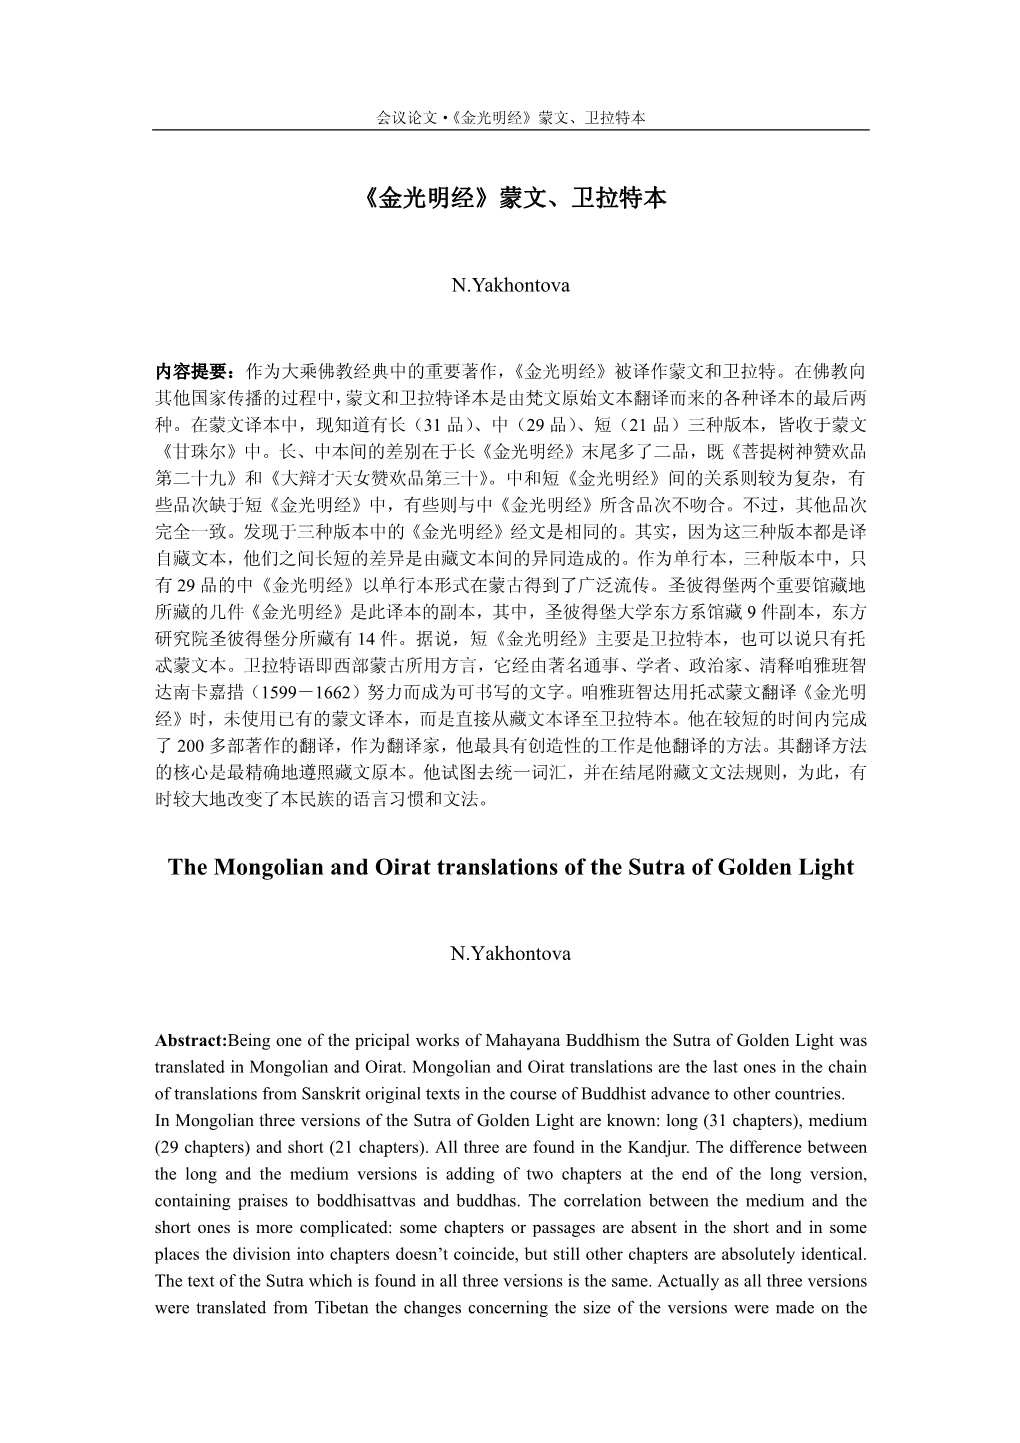 The Mongolian and Oirat Translations of the Sutra of Golden Light